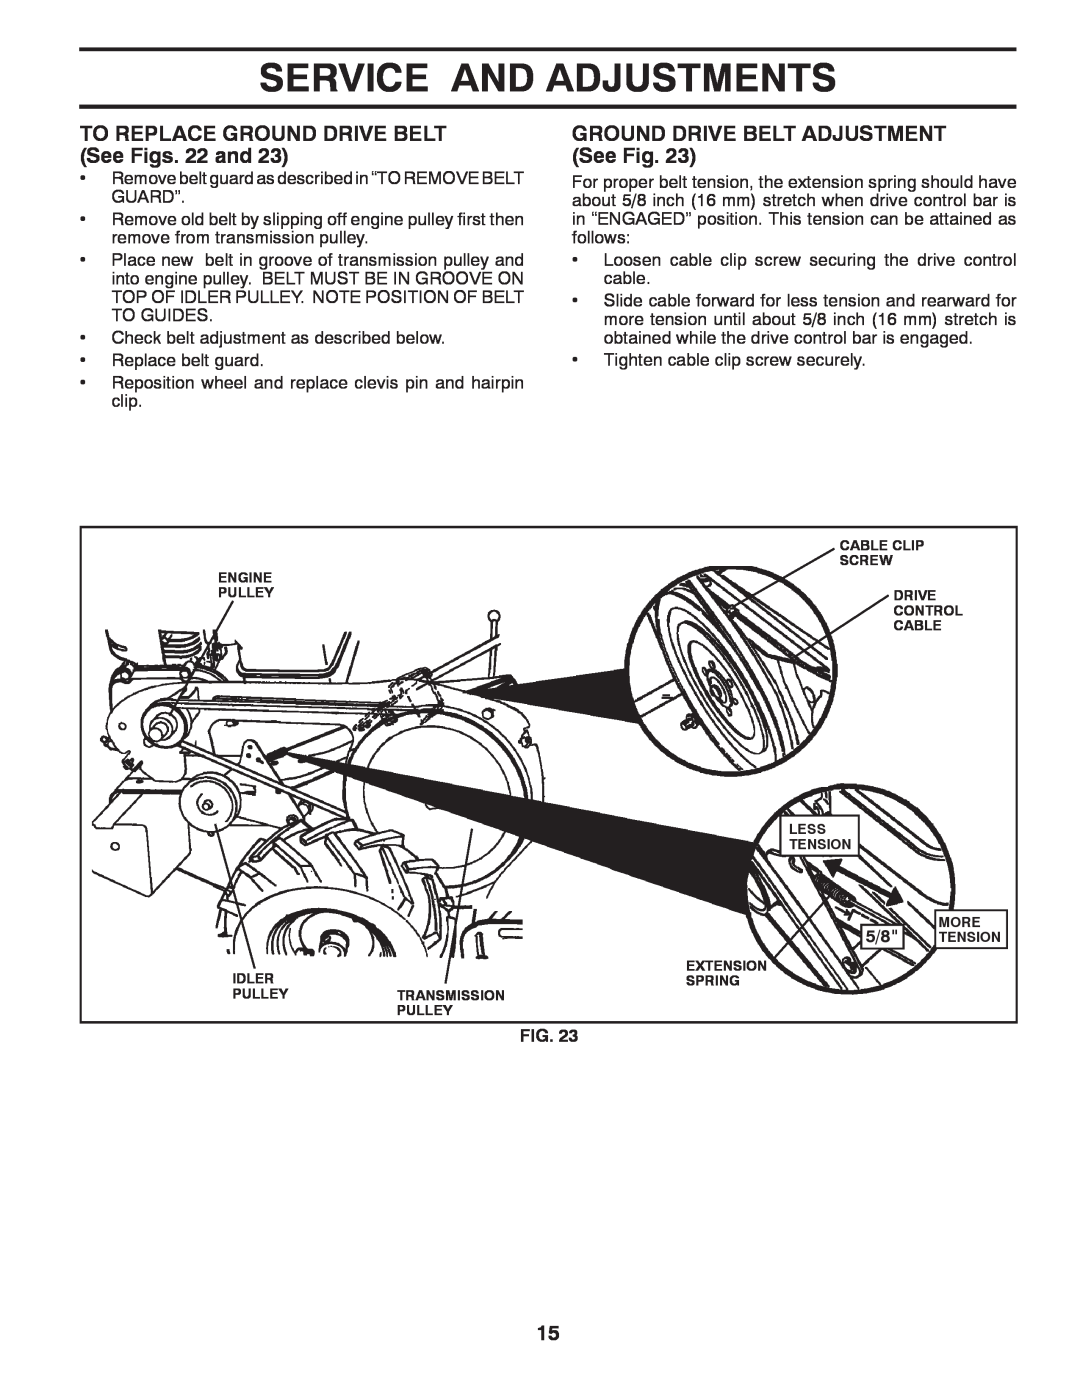 Poulan 96092001300, 417150 manual TO REPLACE GROUND DRIVE BELT See Figs. 22 and, GROUND DRIVE BELT ADJUSTMENT See Fig 